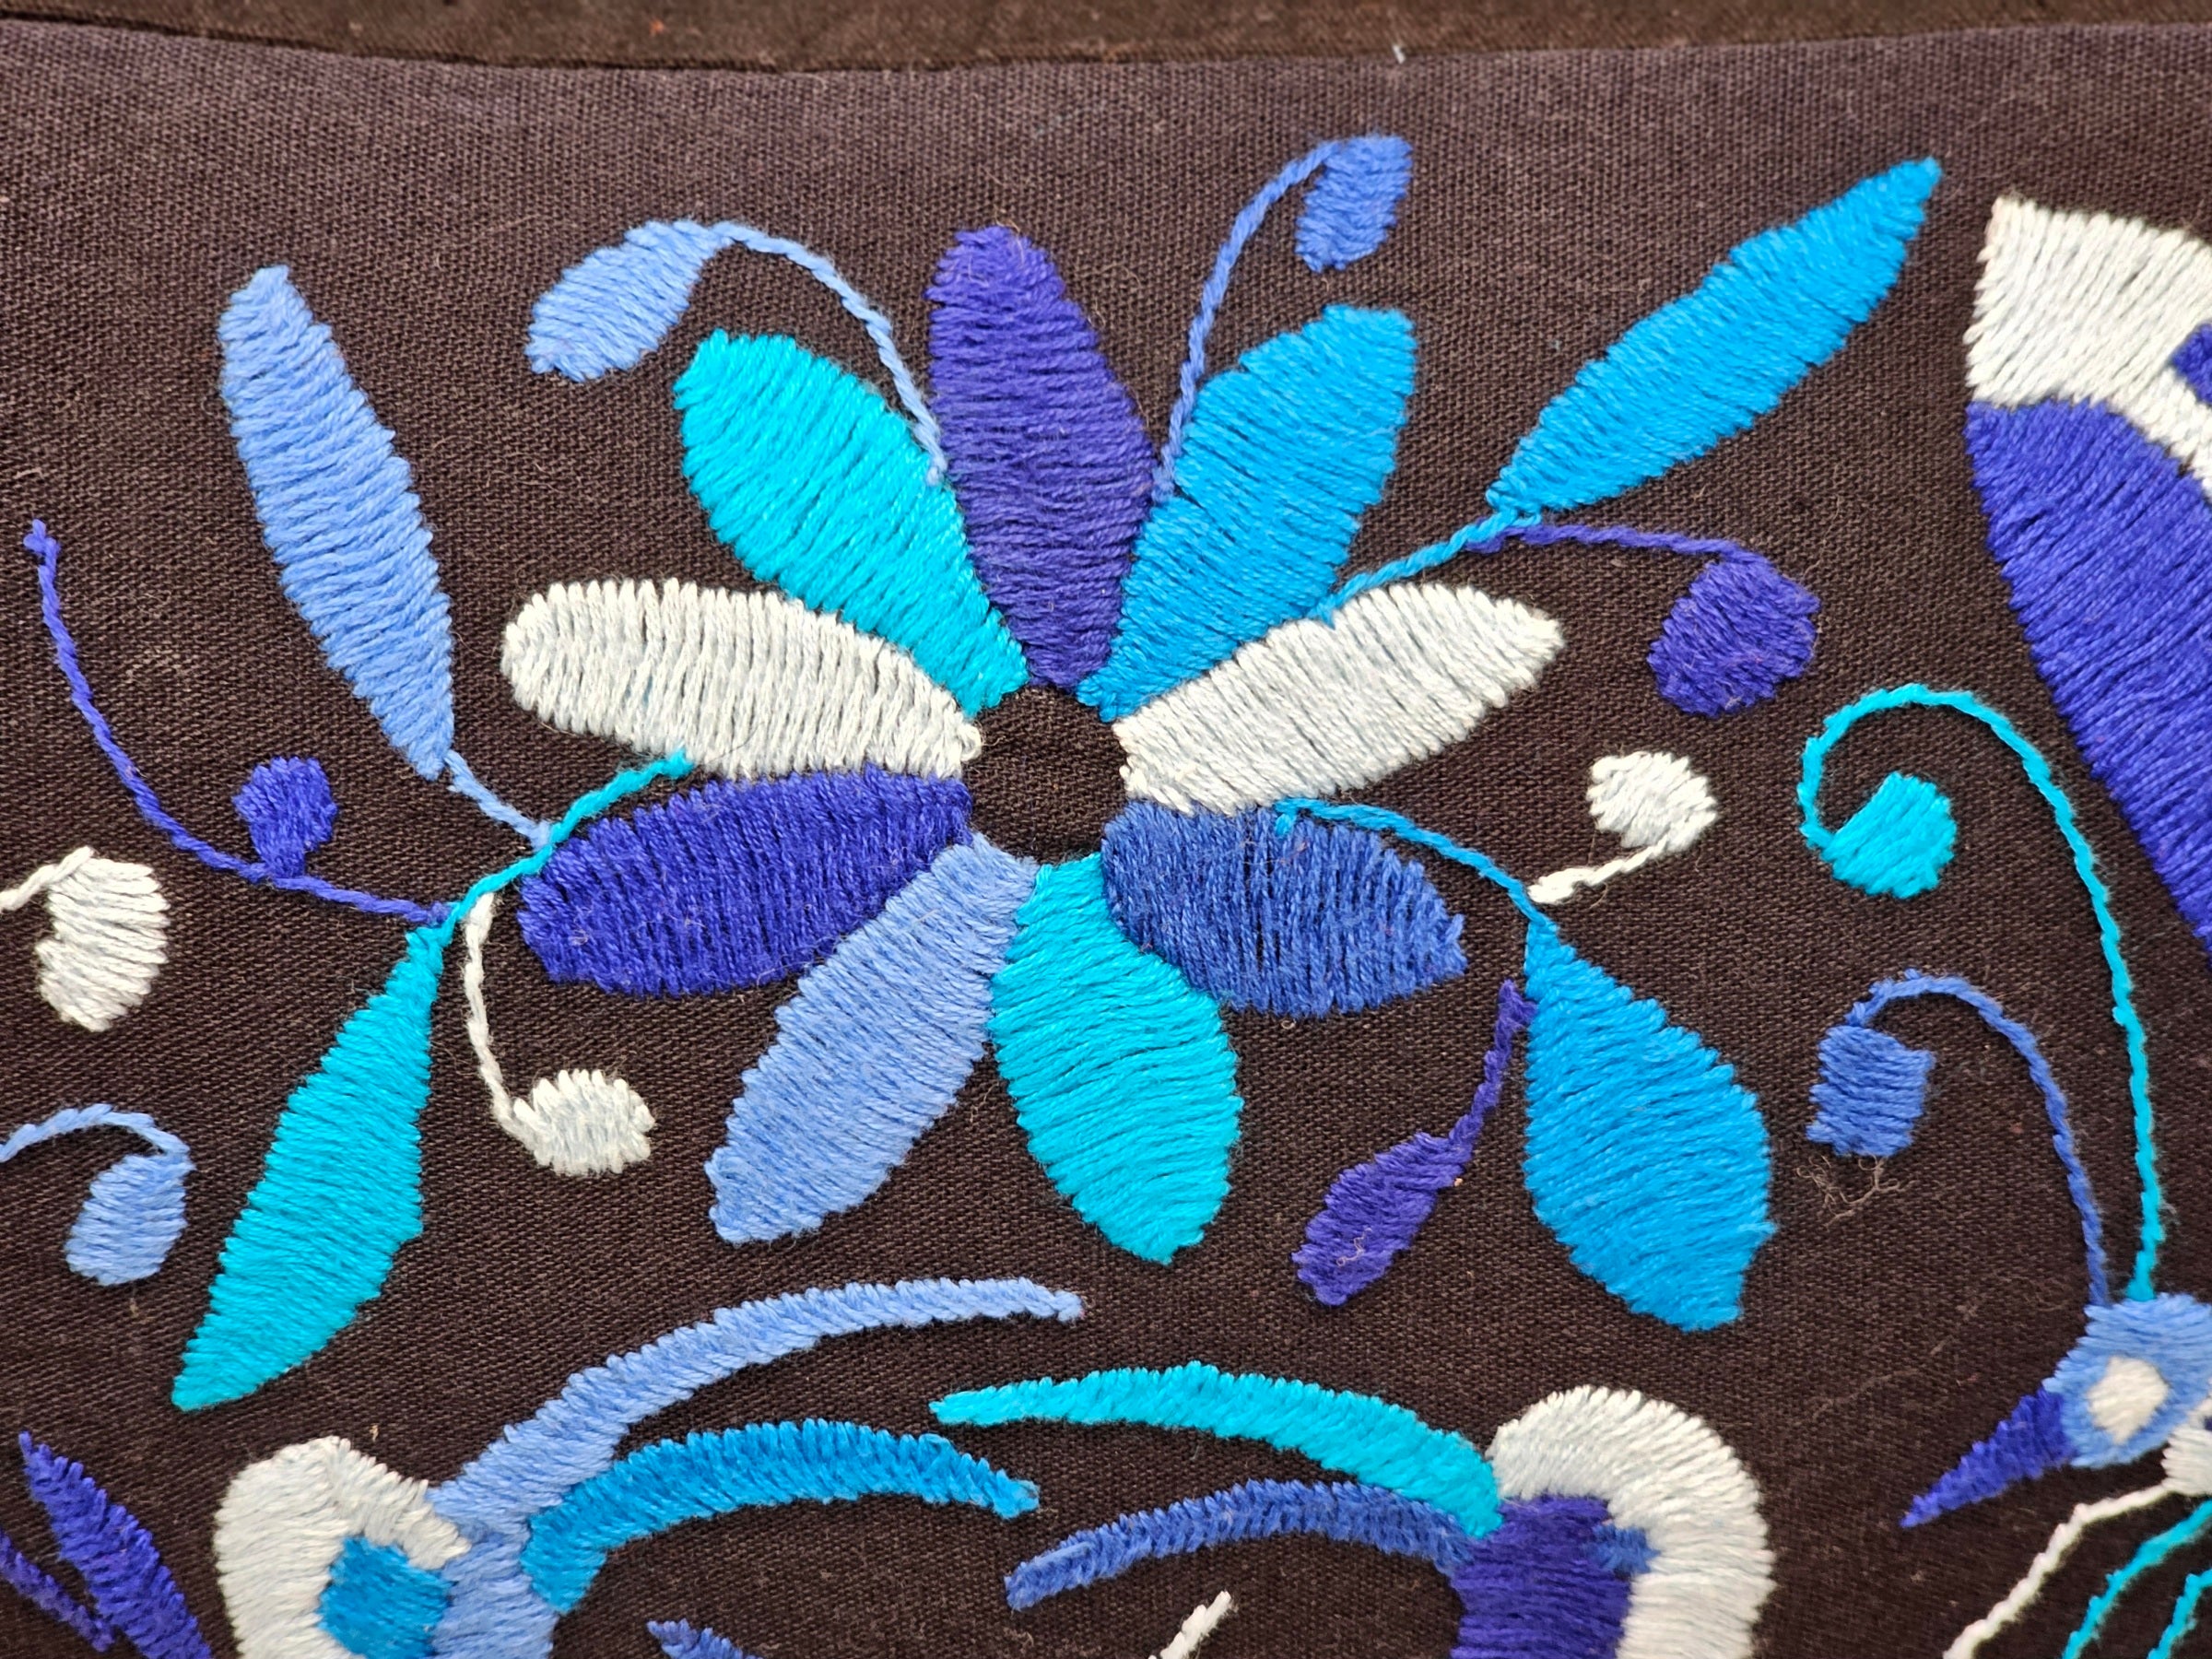 Light Blue, Dark Blue, Periwinkle and White Hand Embroidered Bird, Dragonfly and Flower Pattern Stitched on Black Background Otomi Tenango Pillow Cover. Handmade in Mexico. Ships from the USA. Buy now at www.felipeandgrace.com. 